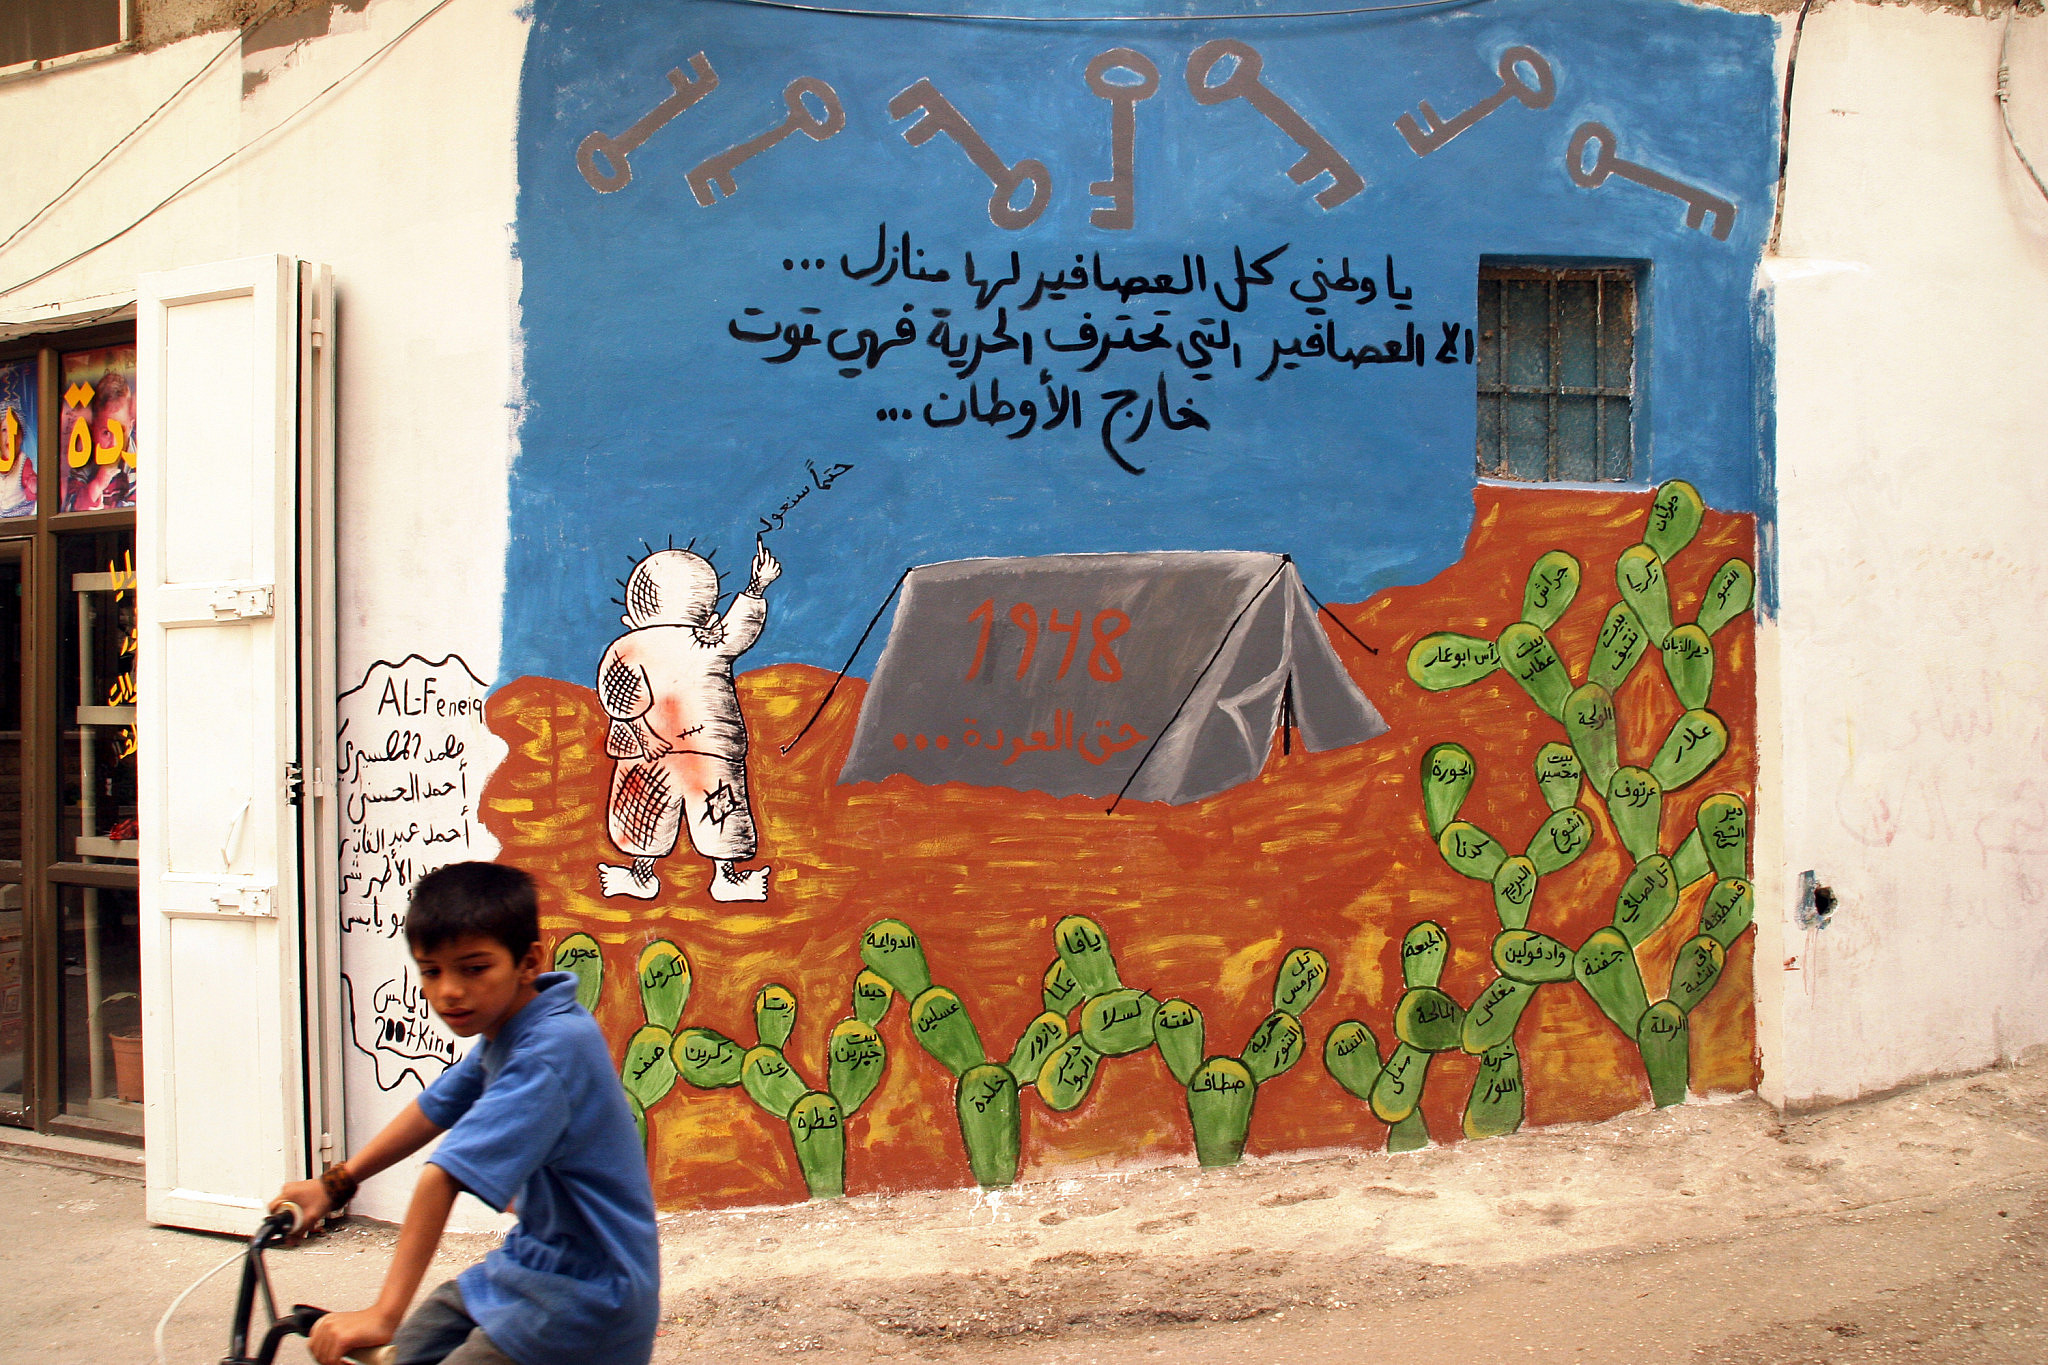 A Palestinian child passes by with his bicycle in front of a mural symbolizing the refugees plight, in Dheisheh refugee camp, in the West Bank city of Bethlehem, May 10, 2007. (Anne Paq/Activestills)